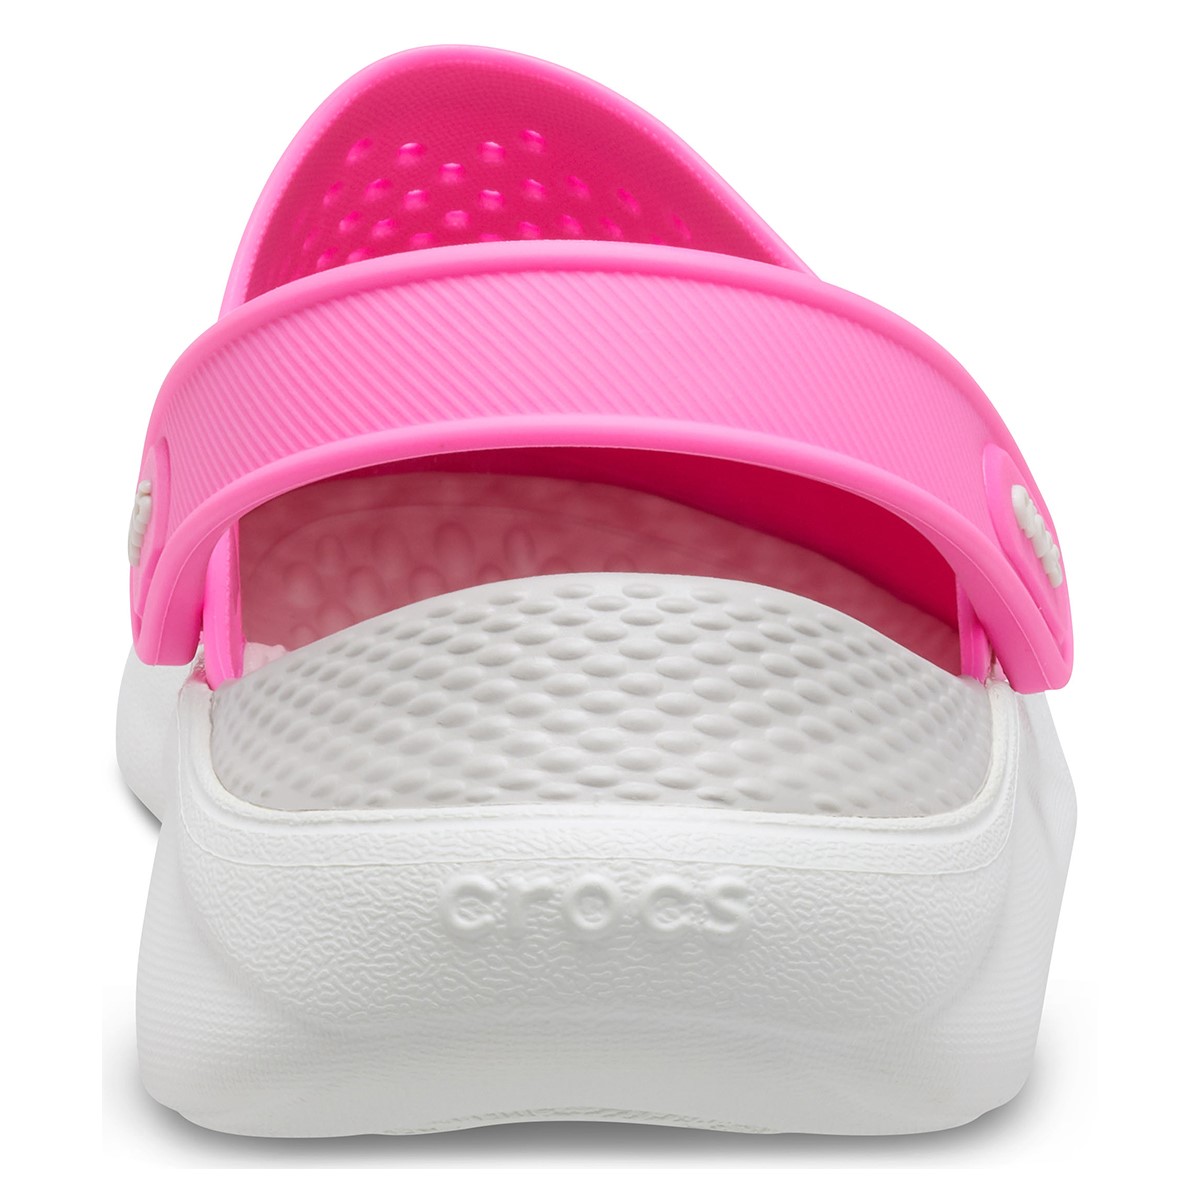 Crocs Unisex Sandalet 204592 Electric Pink/Almost White